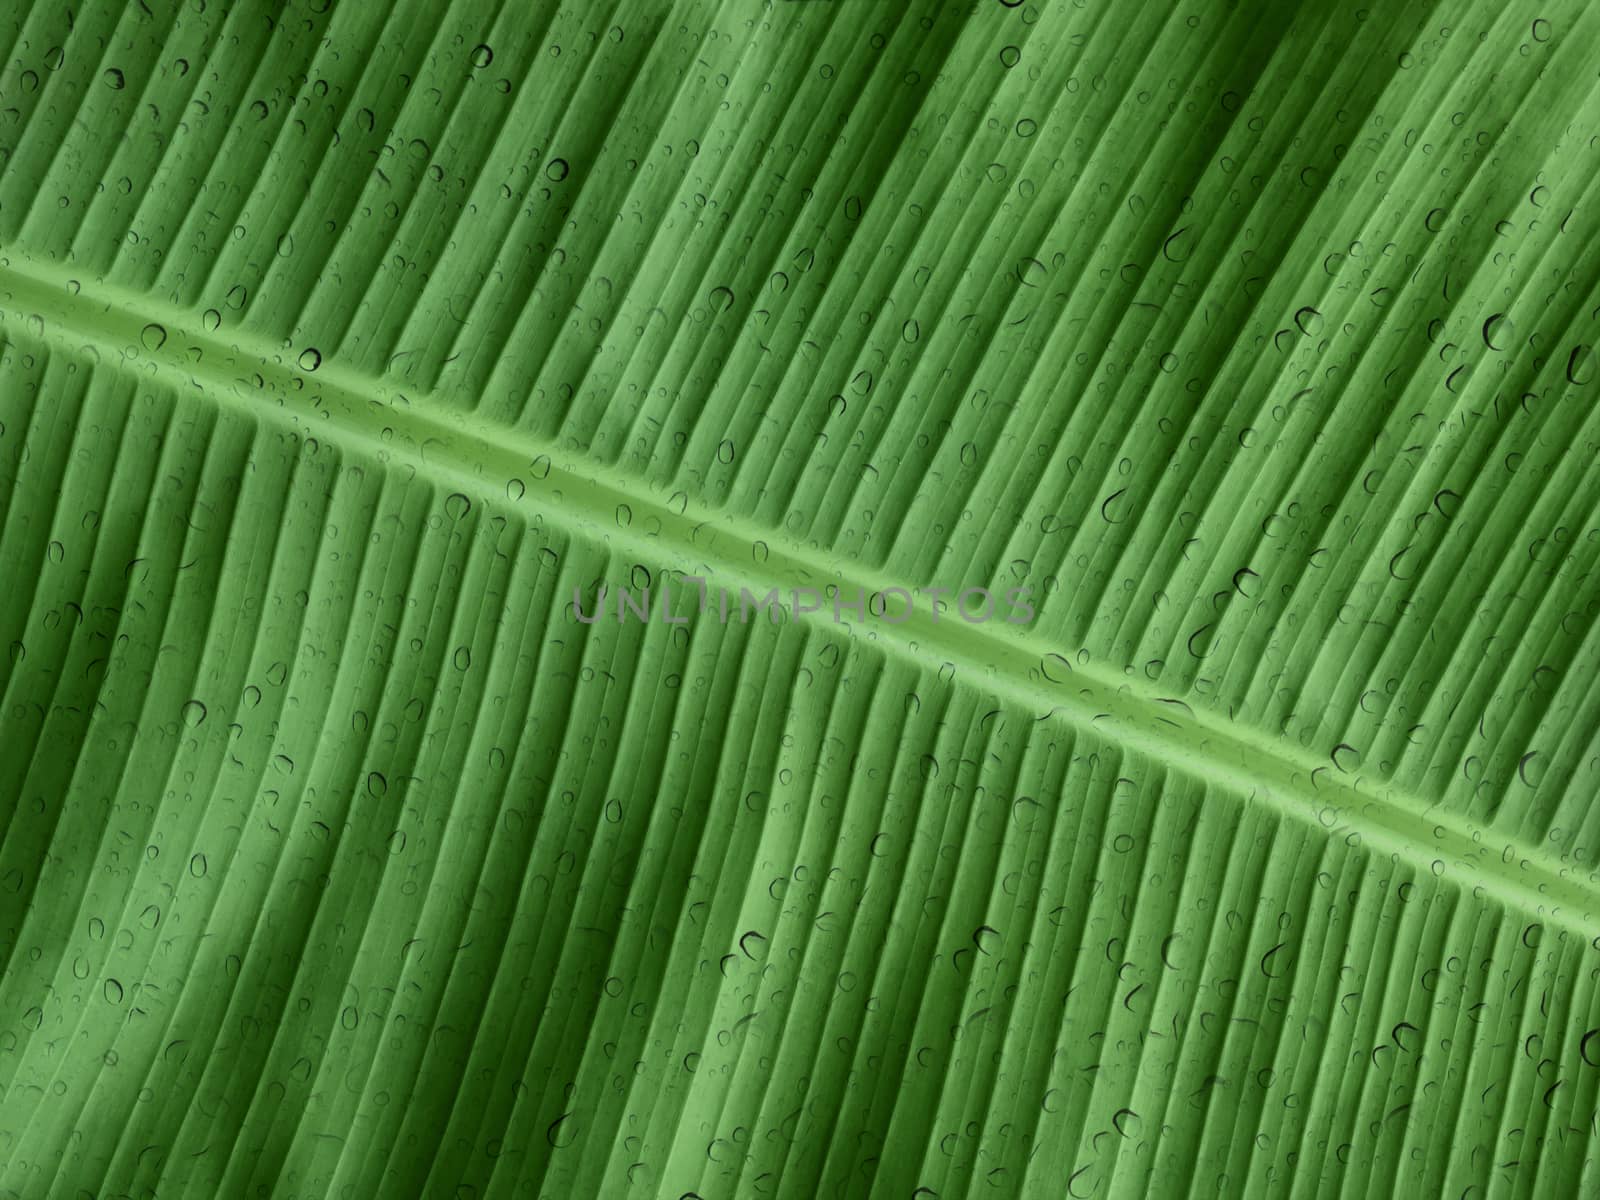 Banana leaf with water drop effect, fresh natural green background 